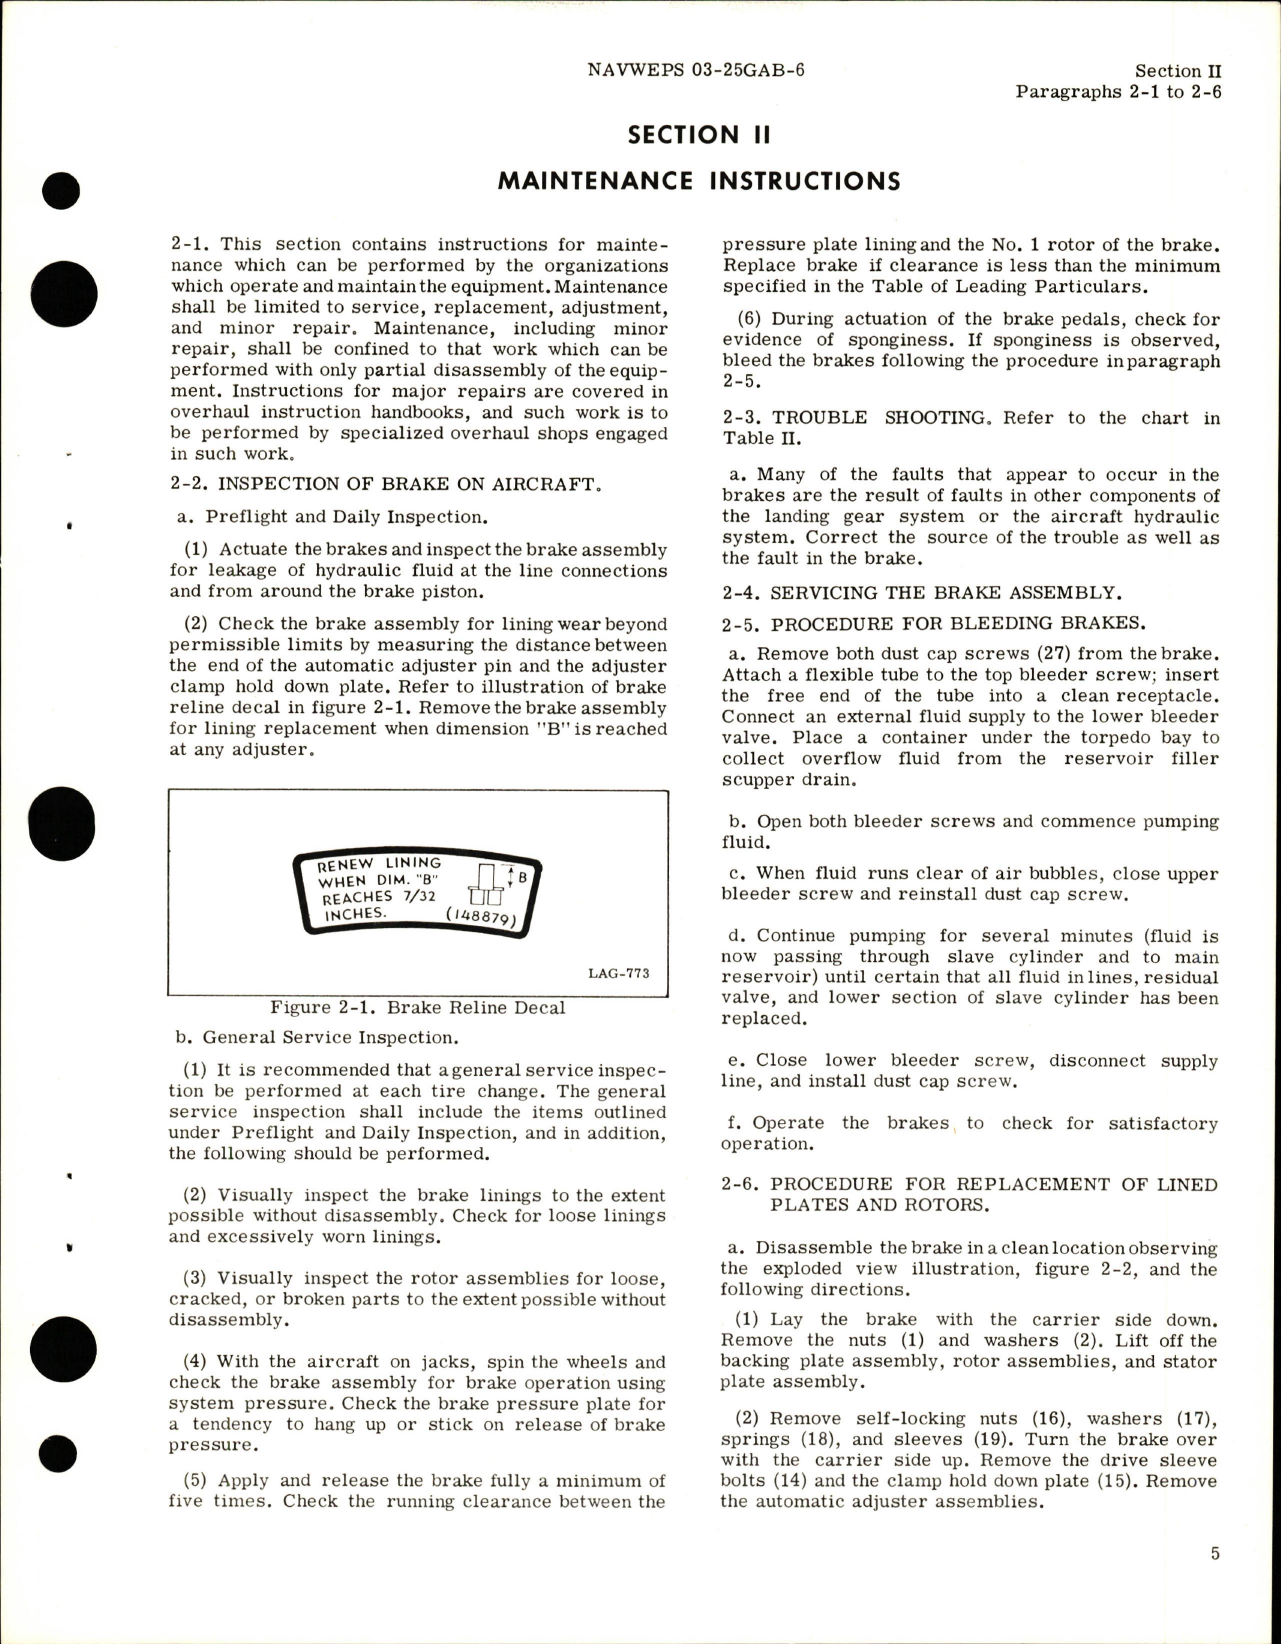 Sample page 9 from AirCorps Library document: Operation and Maintenance Instructions for Main Landing Gear Brake Assembly